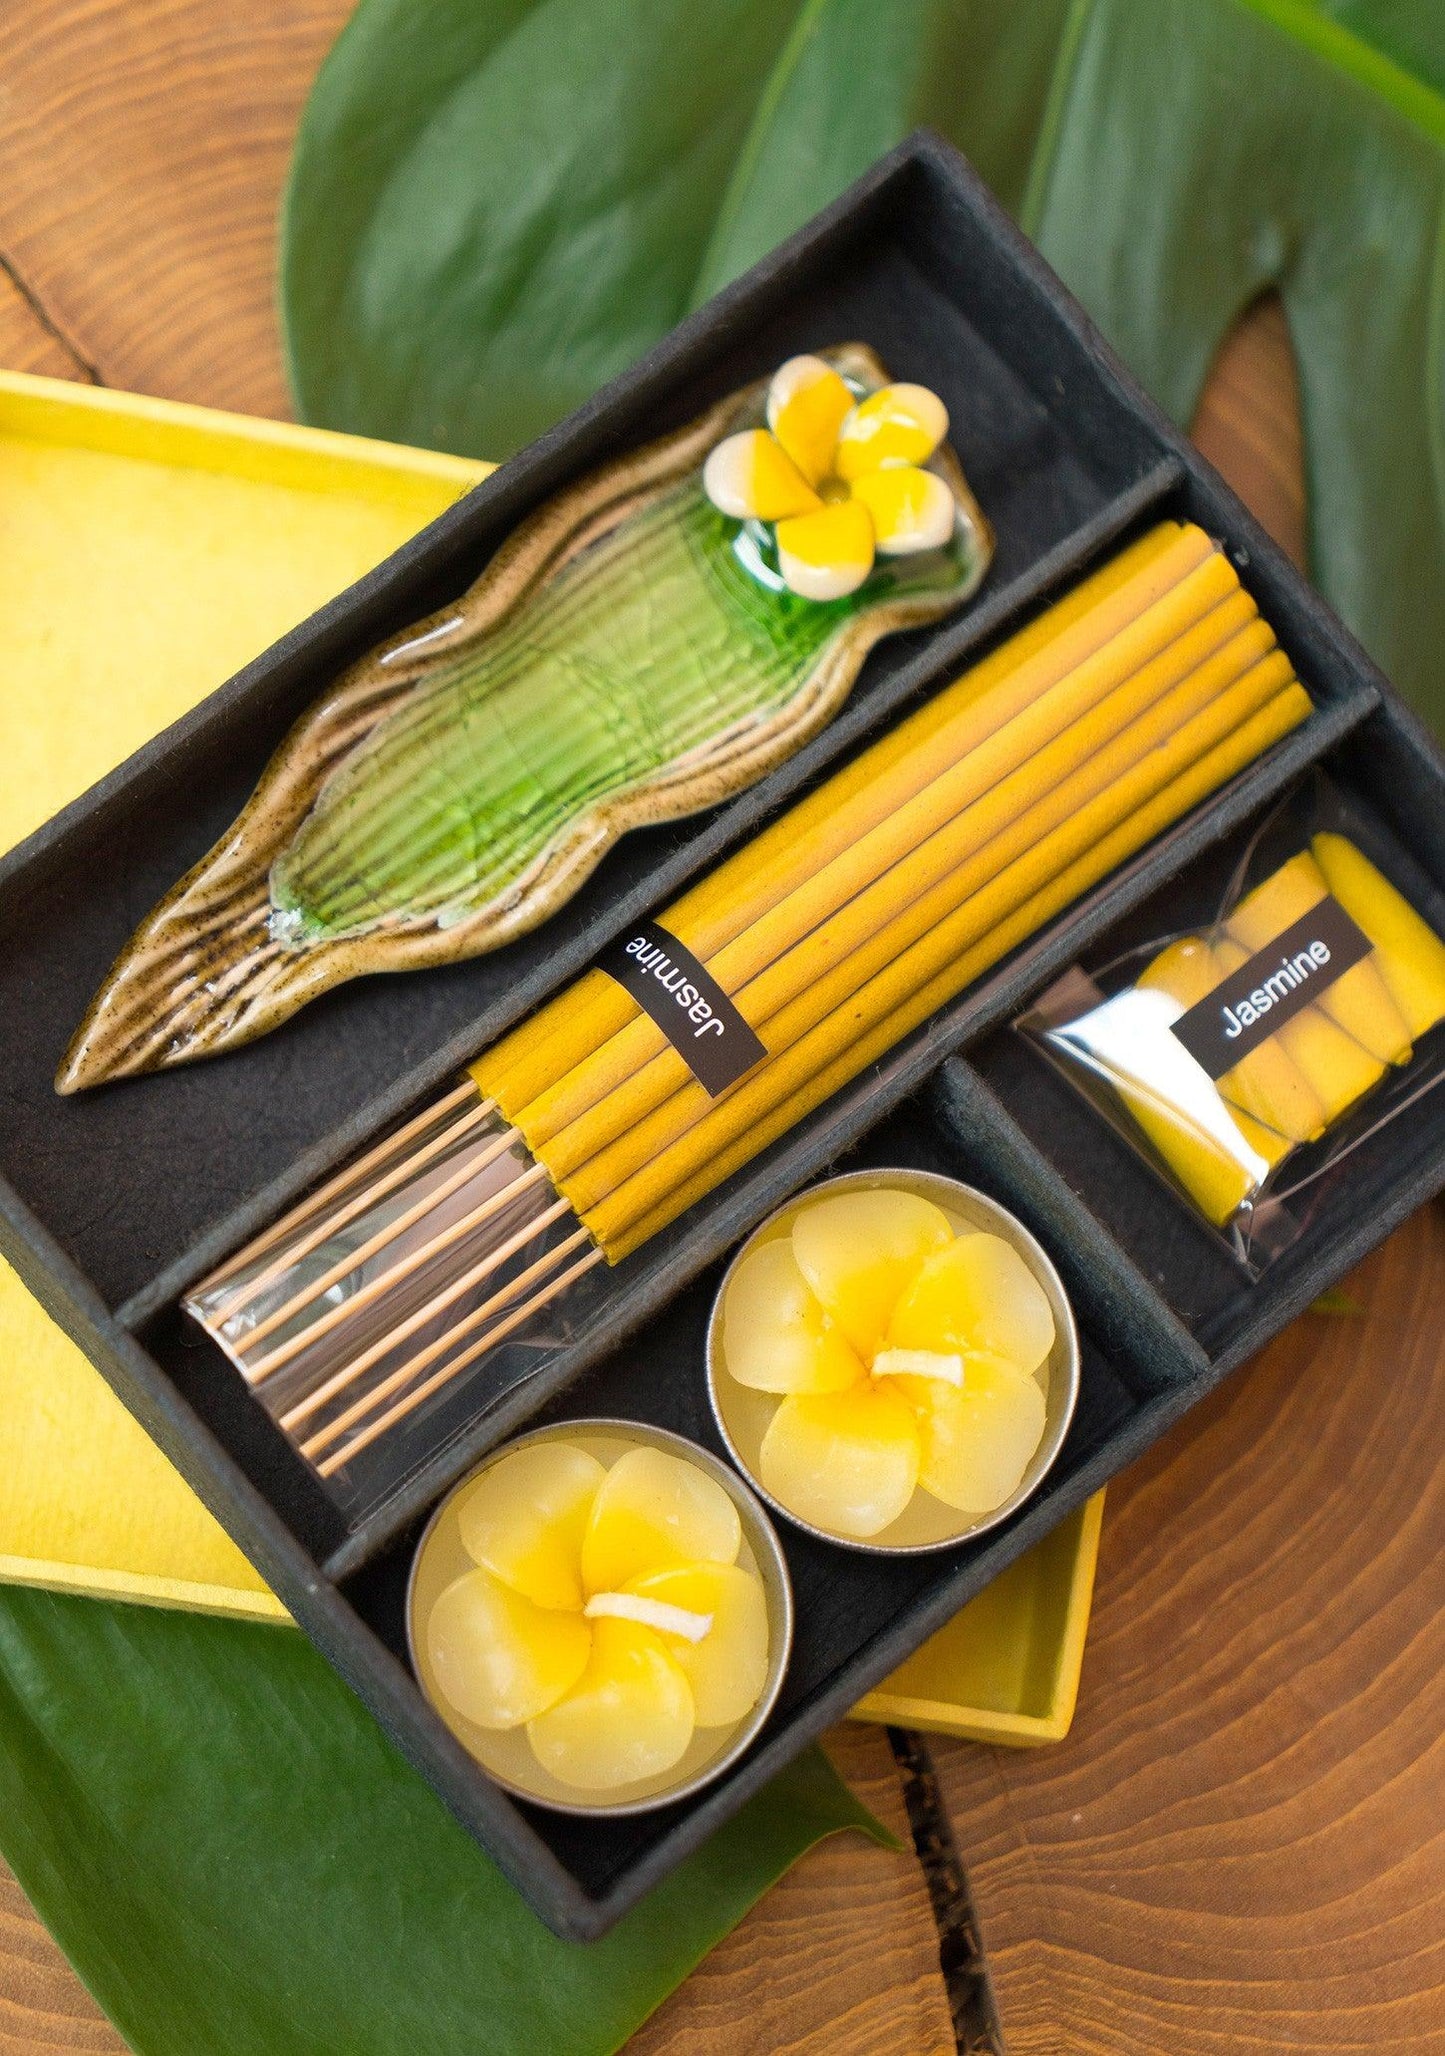 Thai Incense Gift Set With Tealight Candles, Incense Cones & a Holder